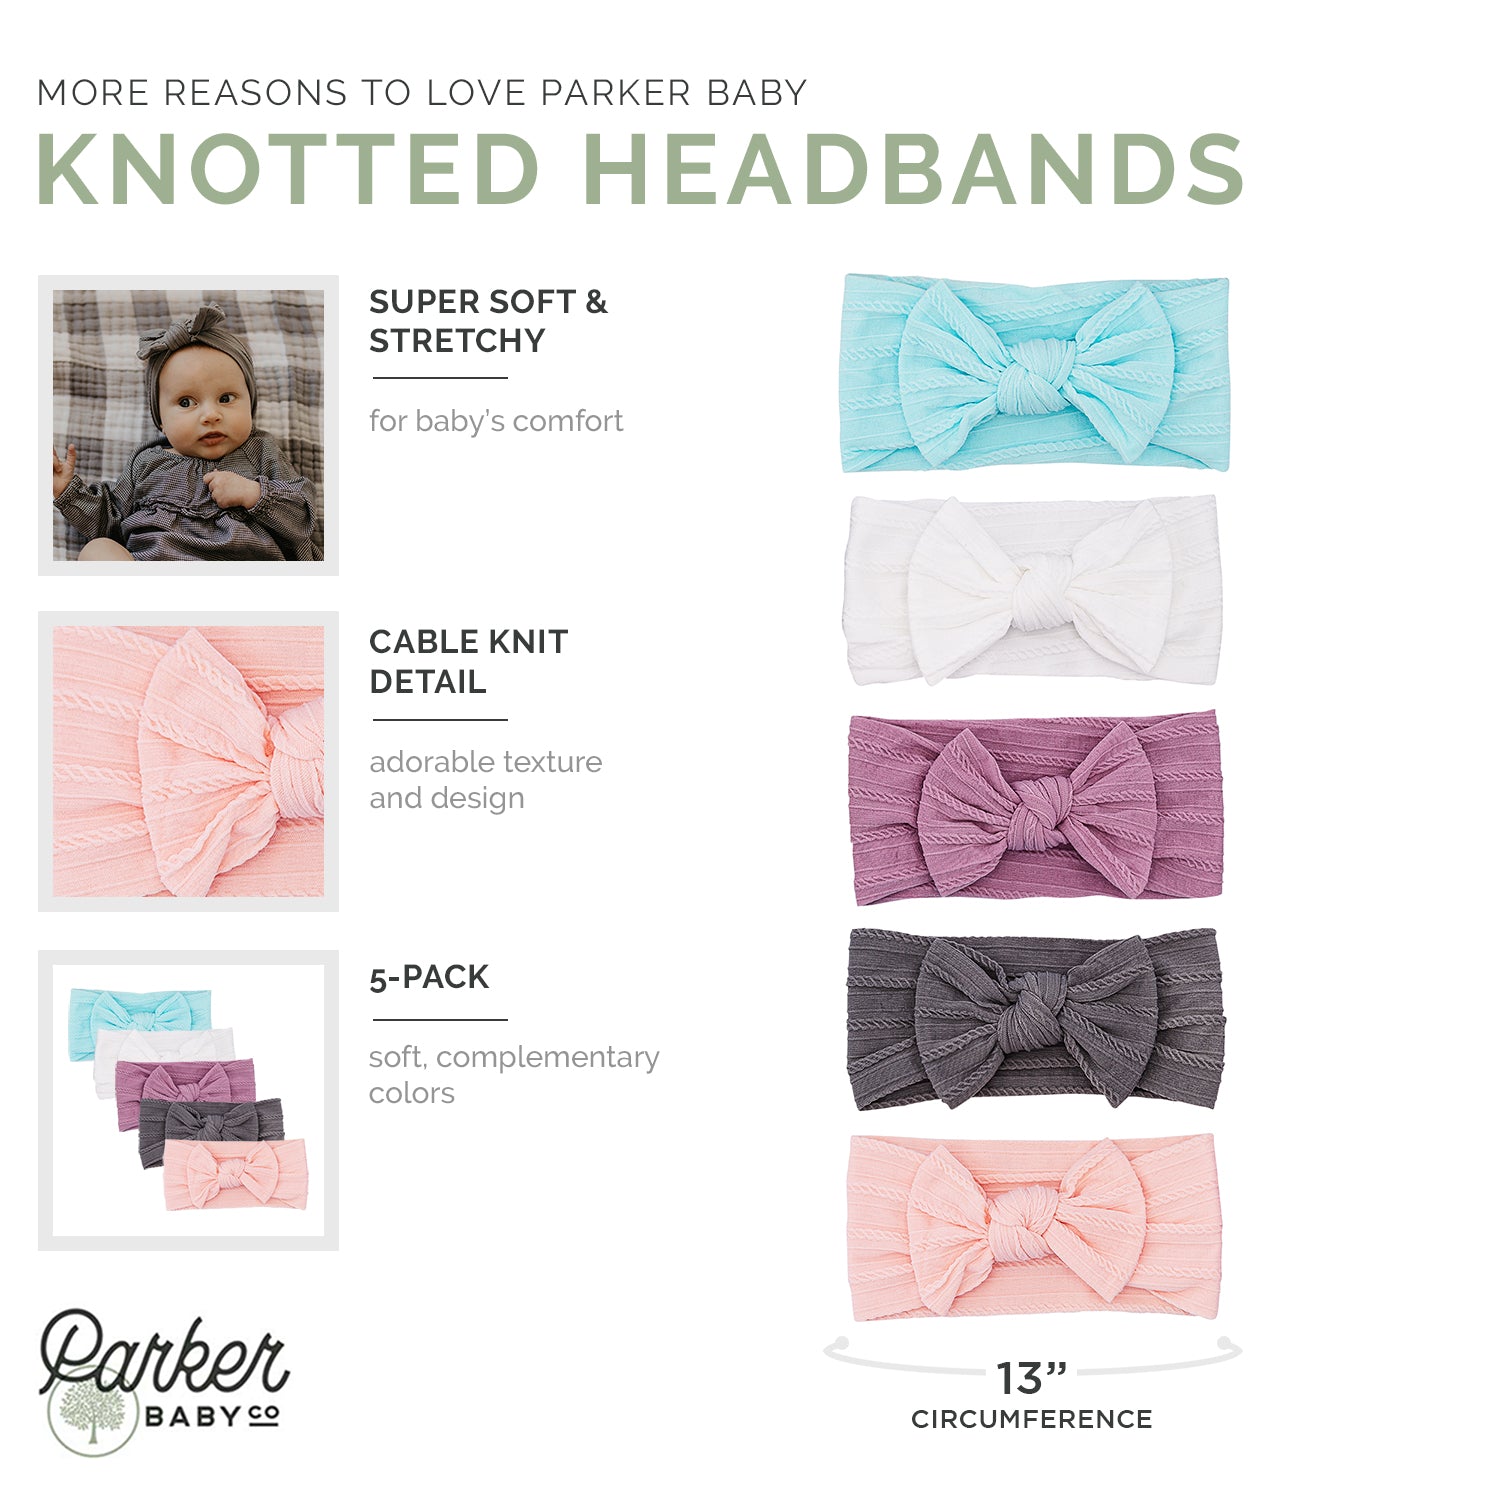 The Infographic for Grace Set: set of 5 Cable Knit Knotted Headbands. 